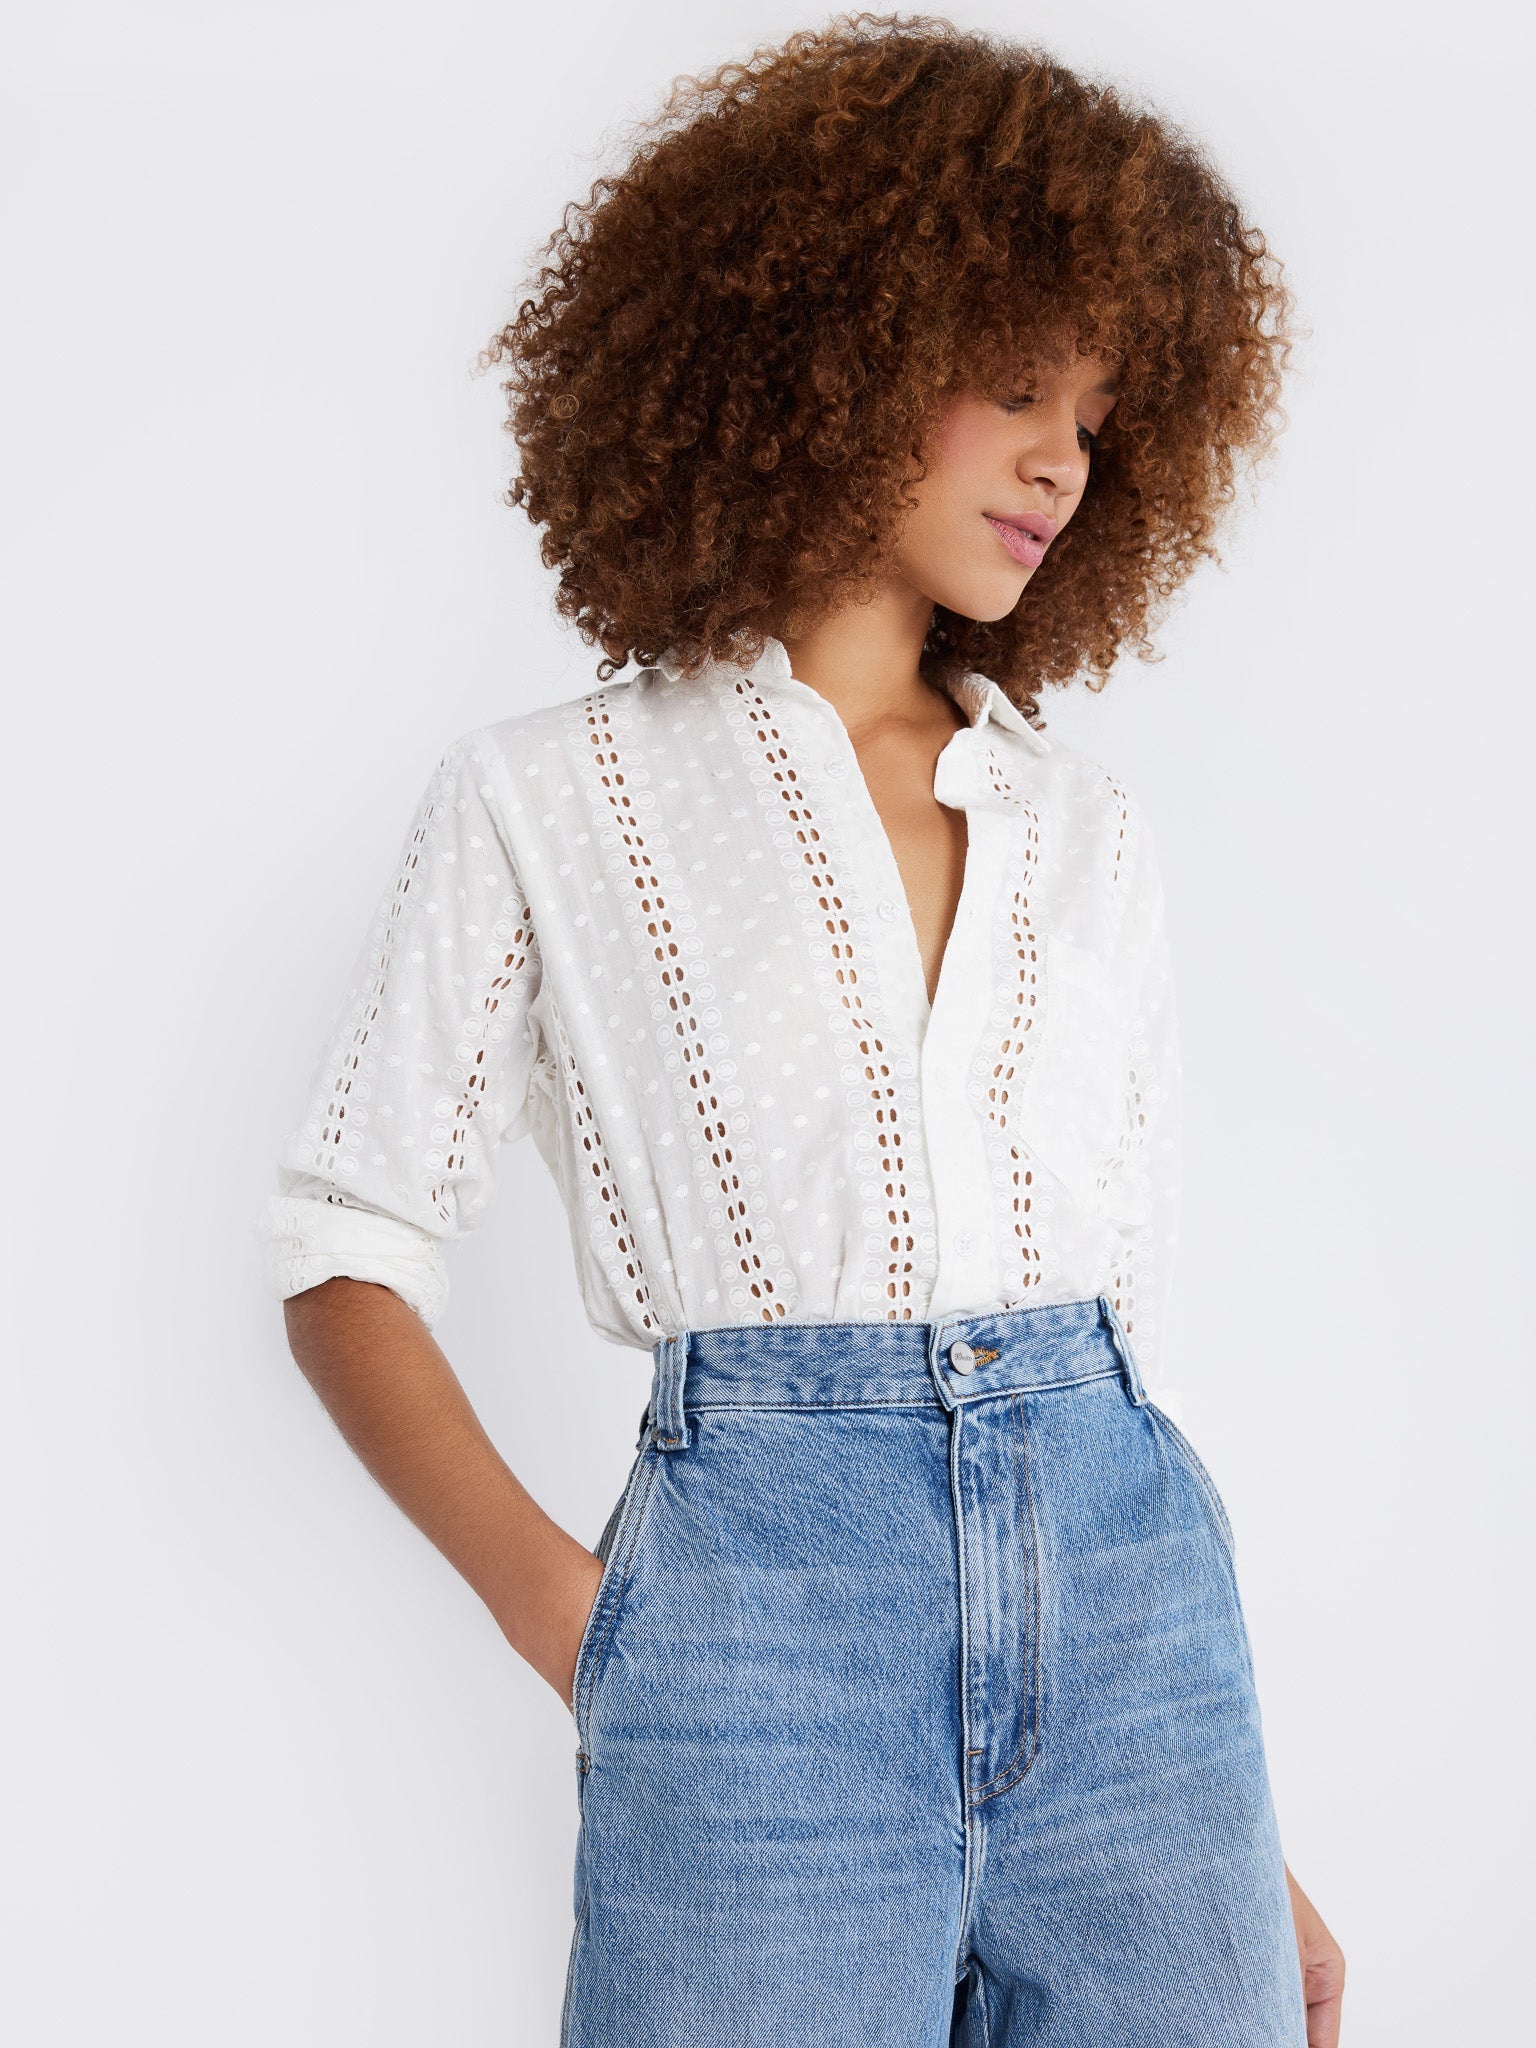 MILLE Clothing Sofia Top in Pearl Polka Dot Eyelet